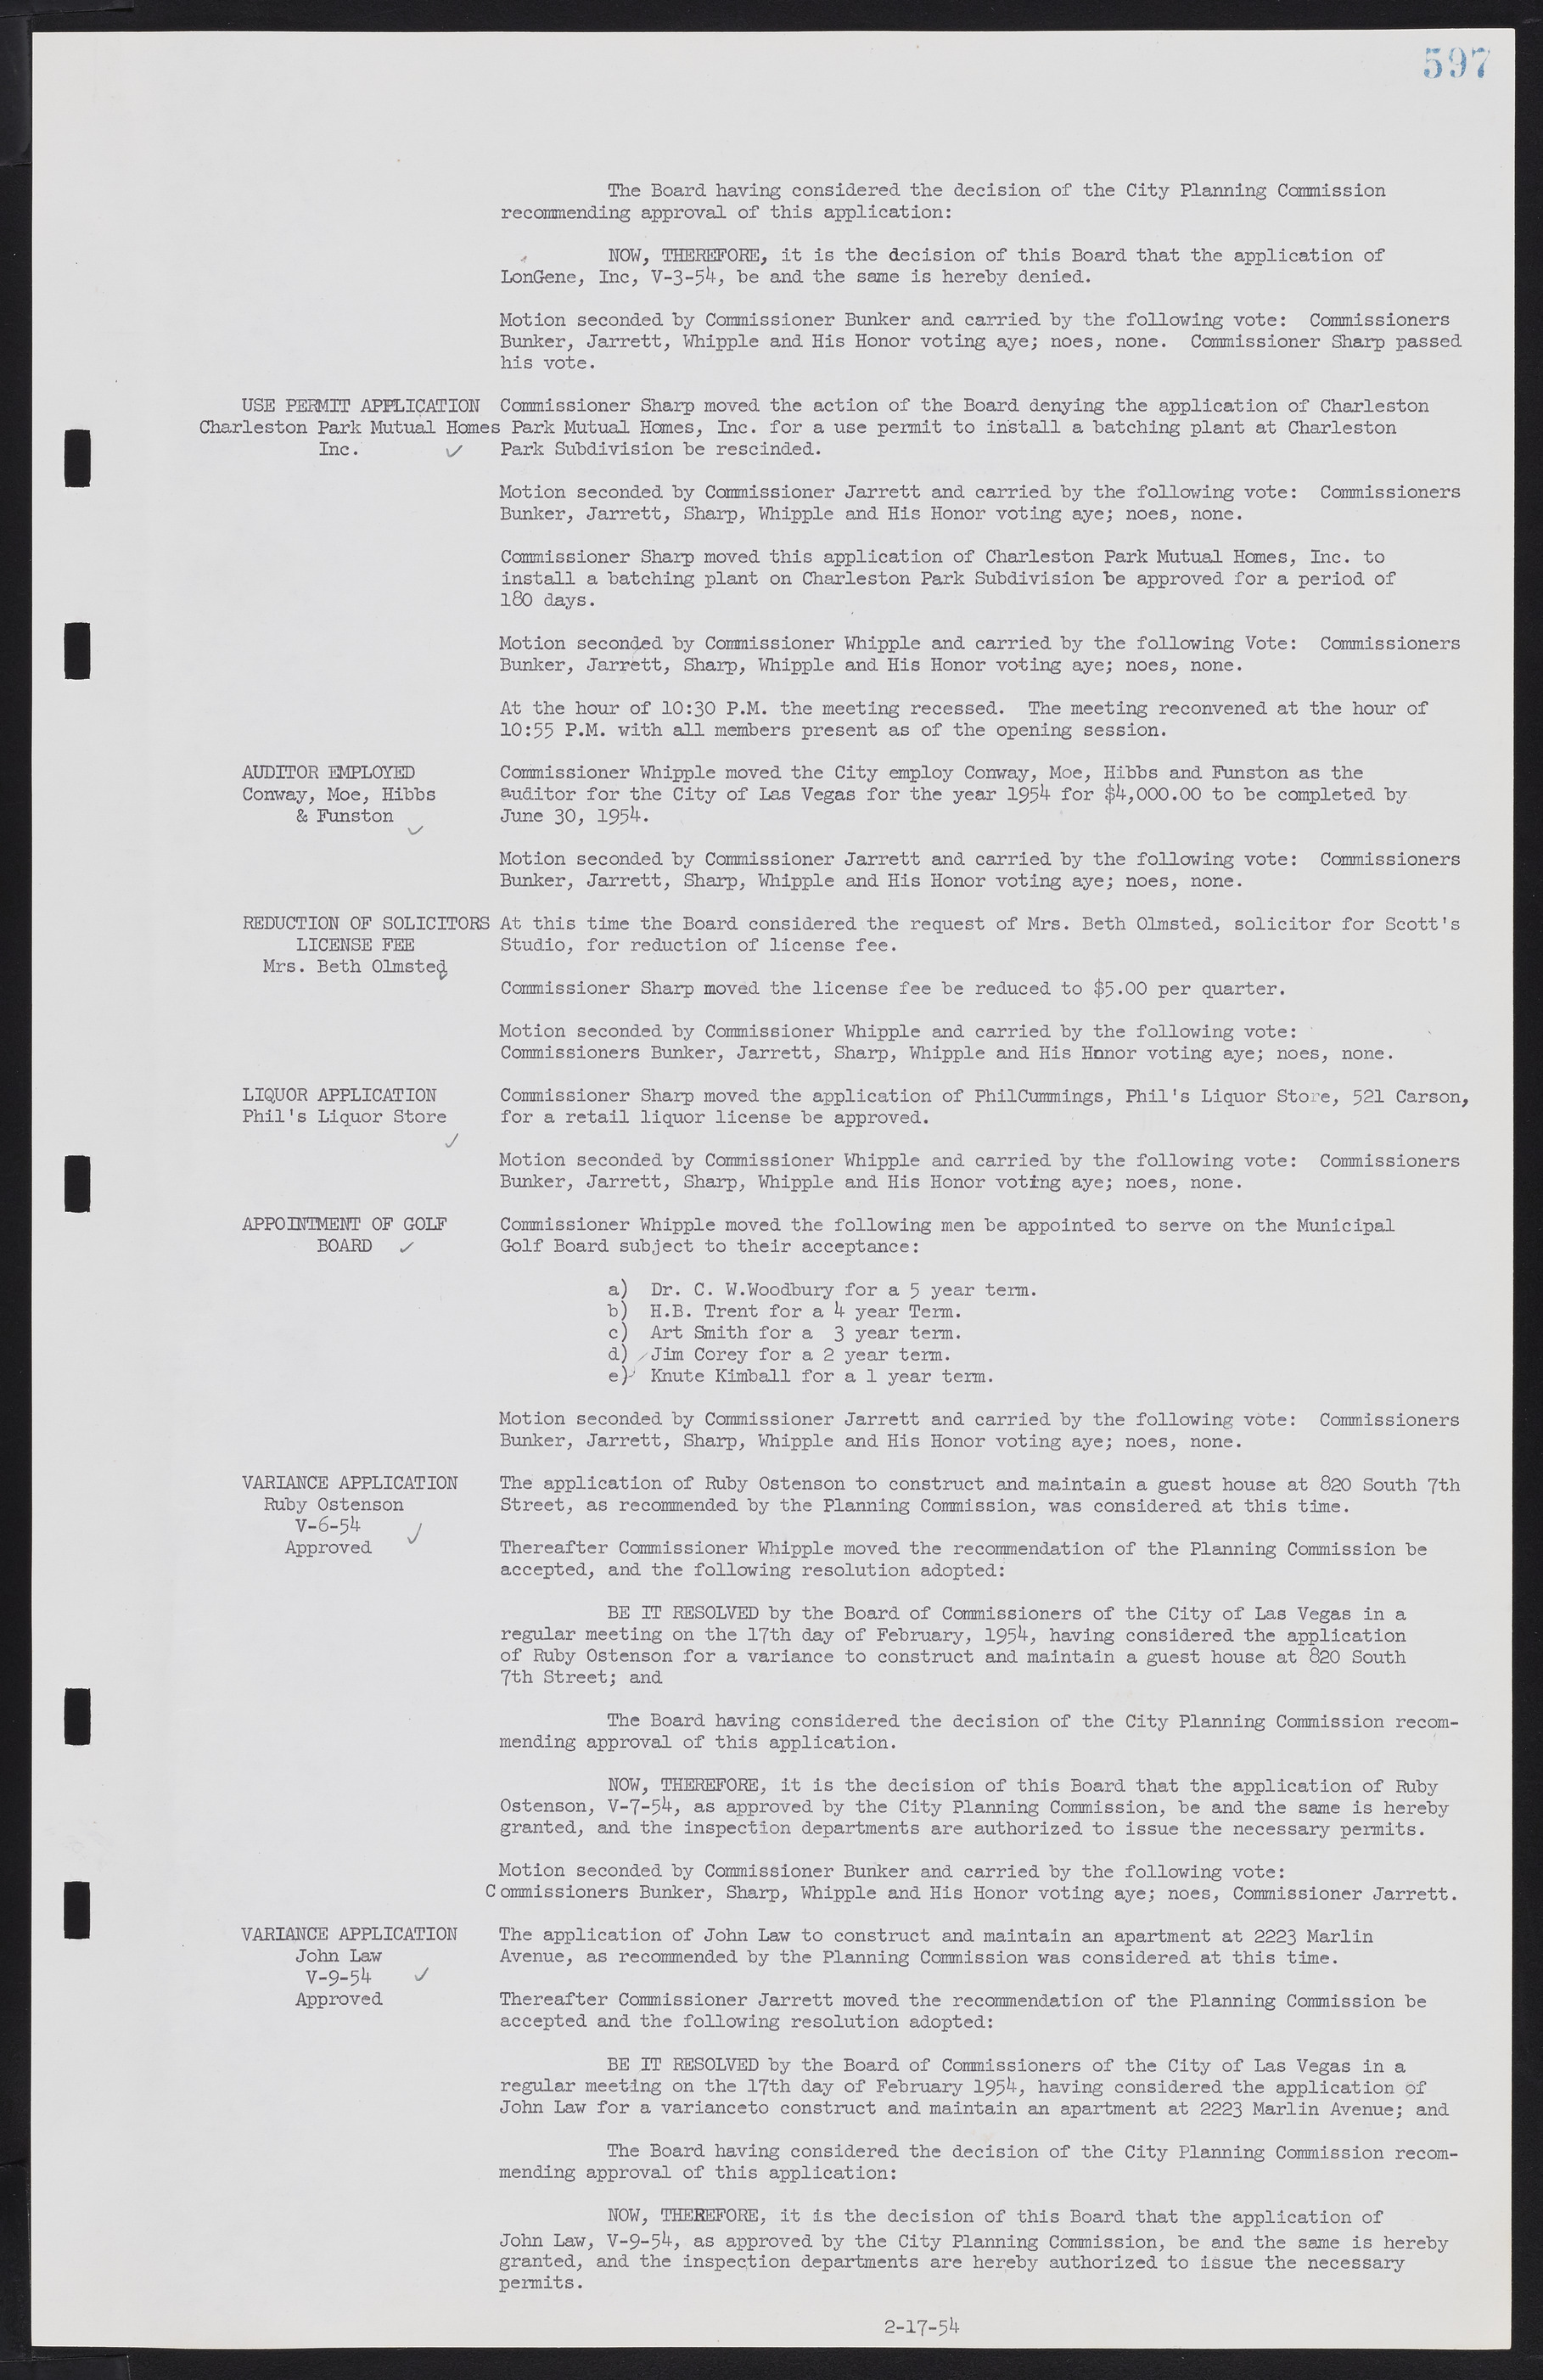 Las Vegas City Commission Minutes, May 26, 1952 to February 17, 1954, lvc000008-627